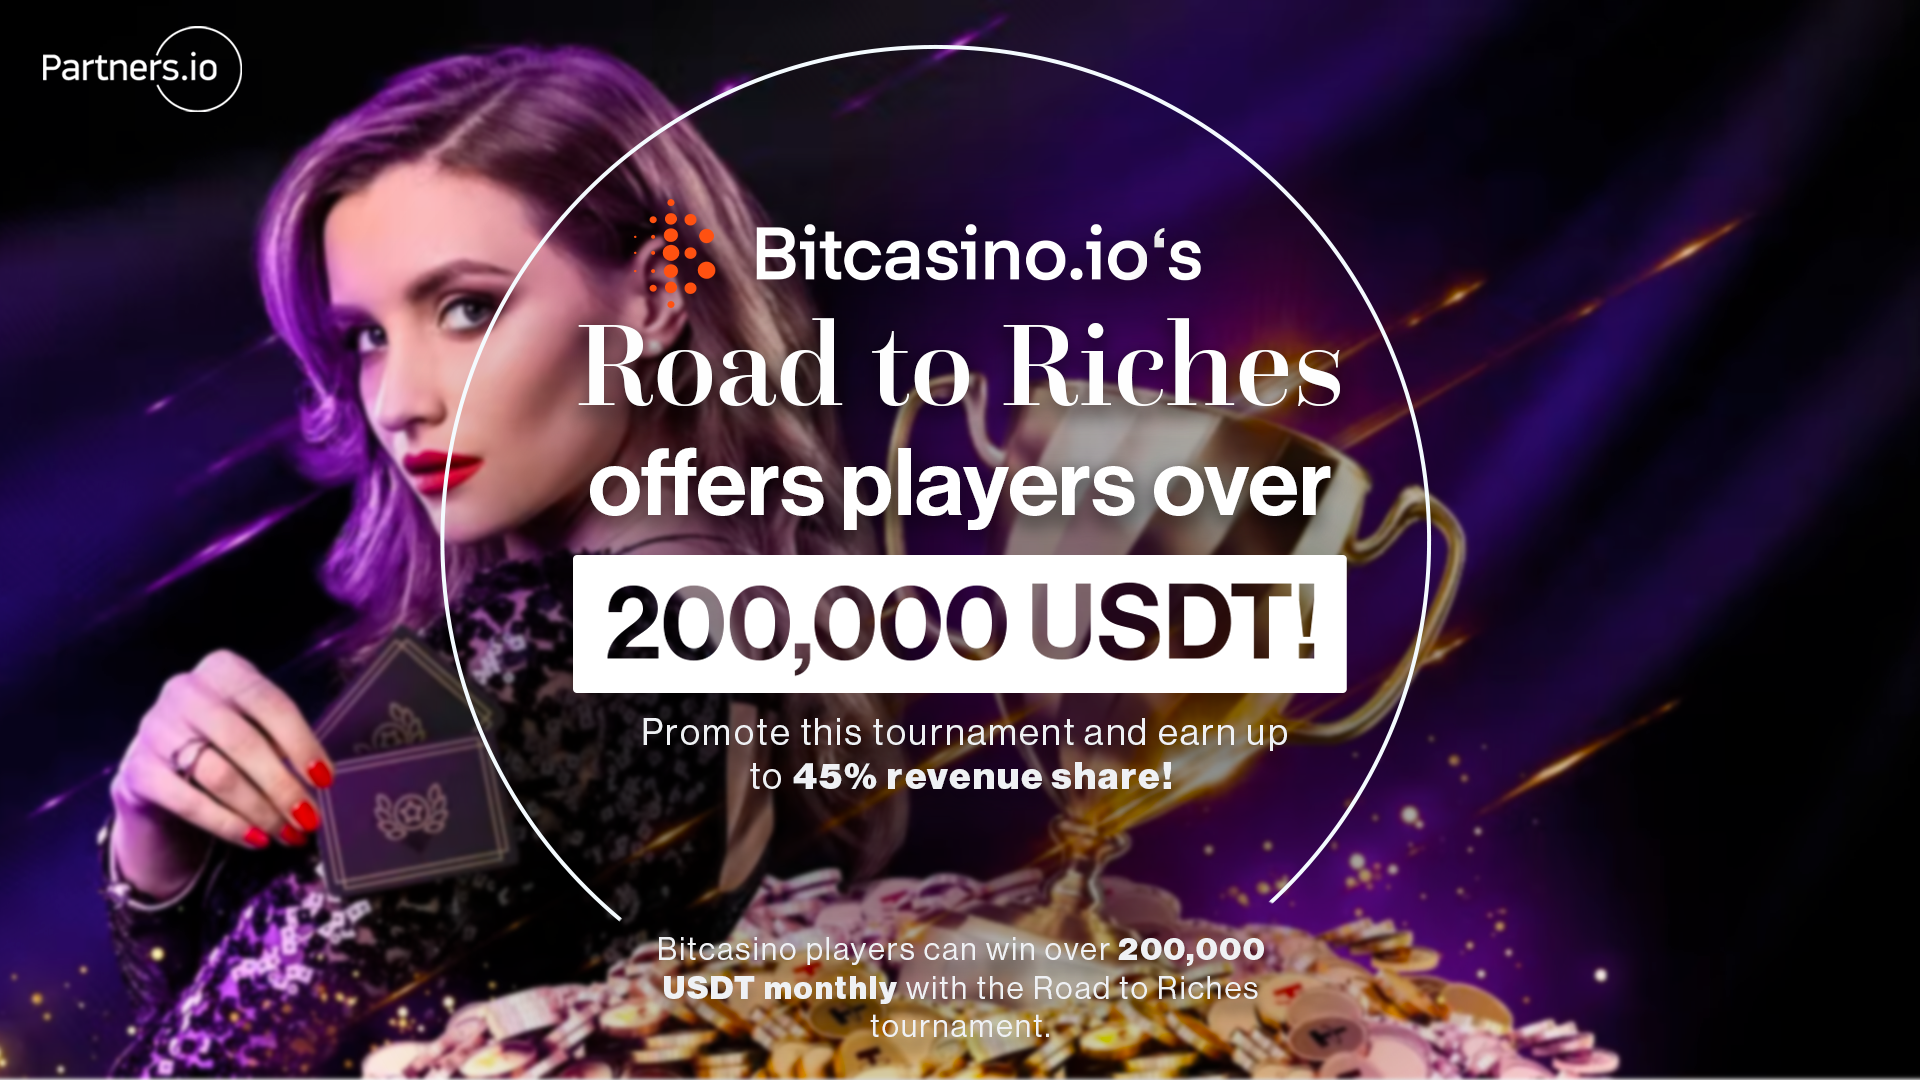 Bitcasino’s Road to Riches offers players over 200,000 USDT!